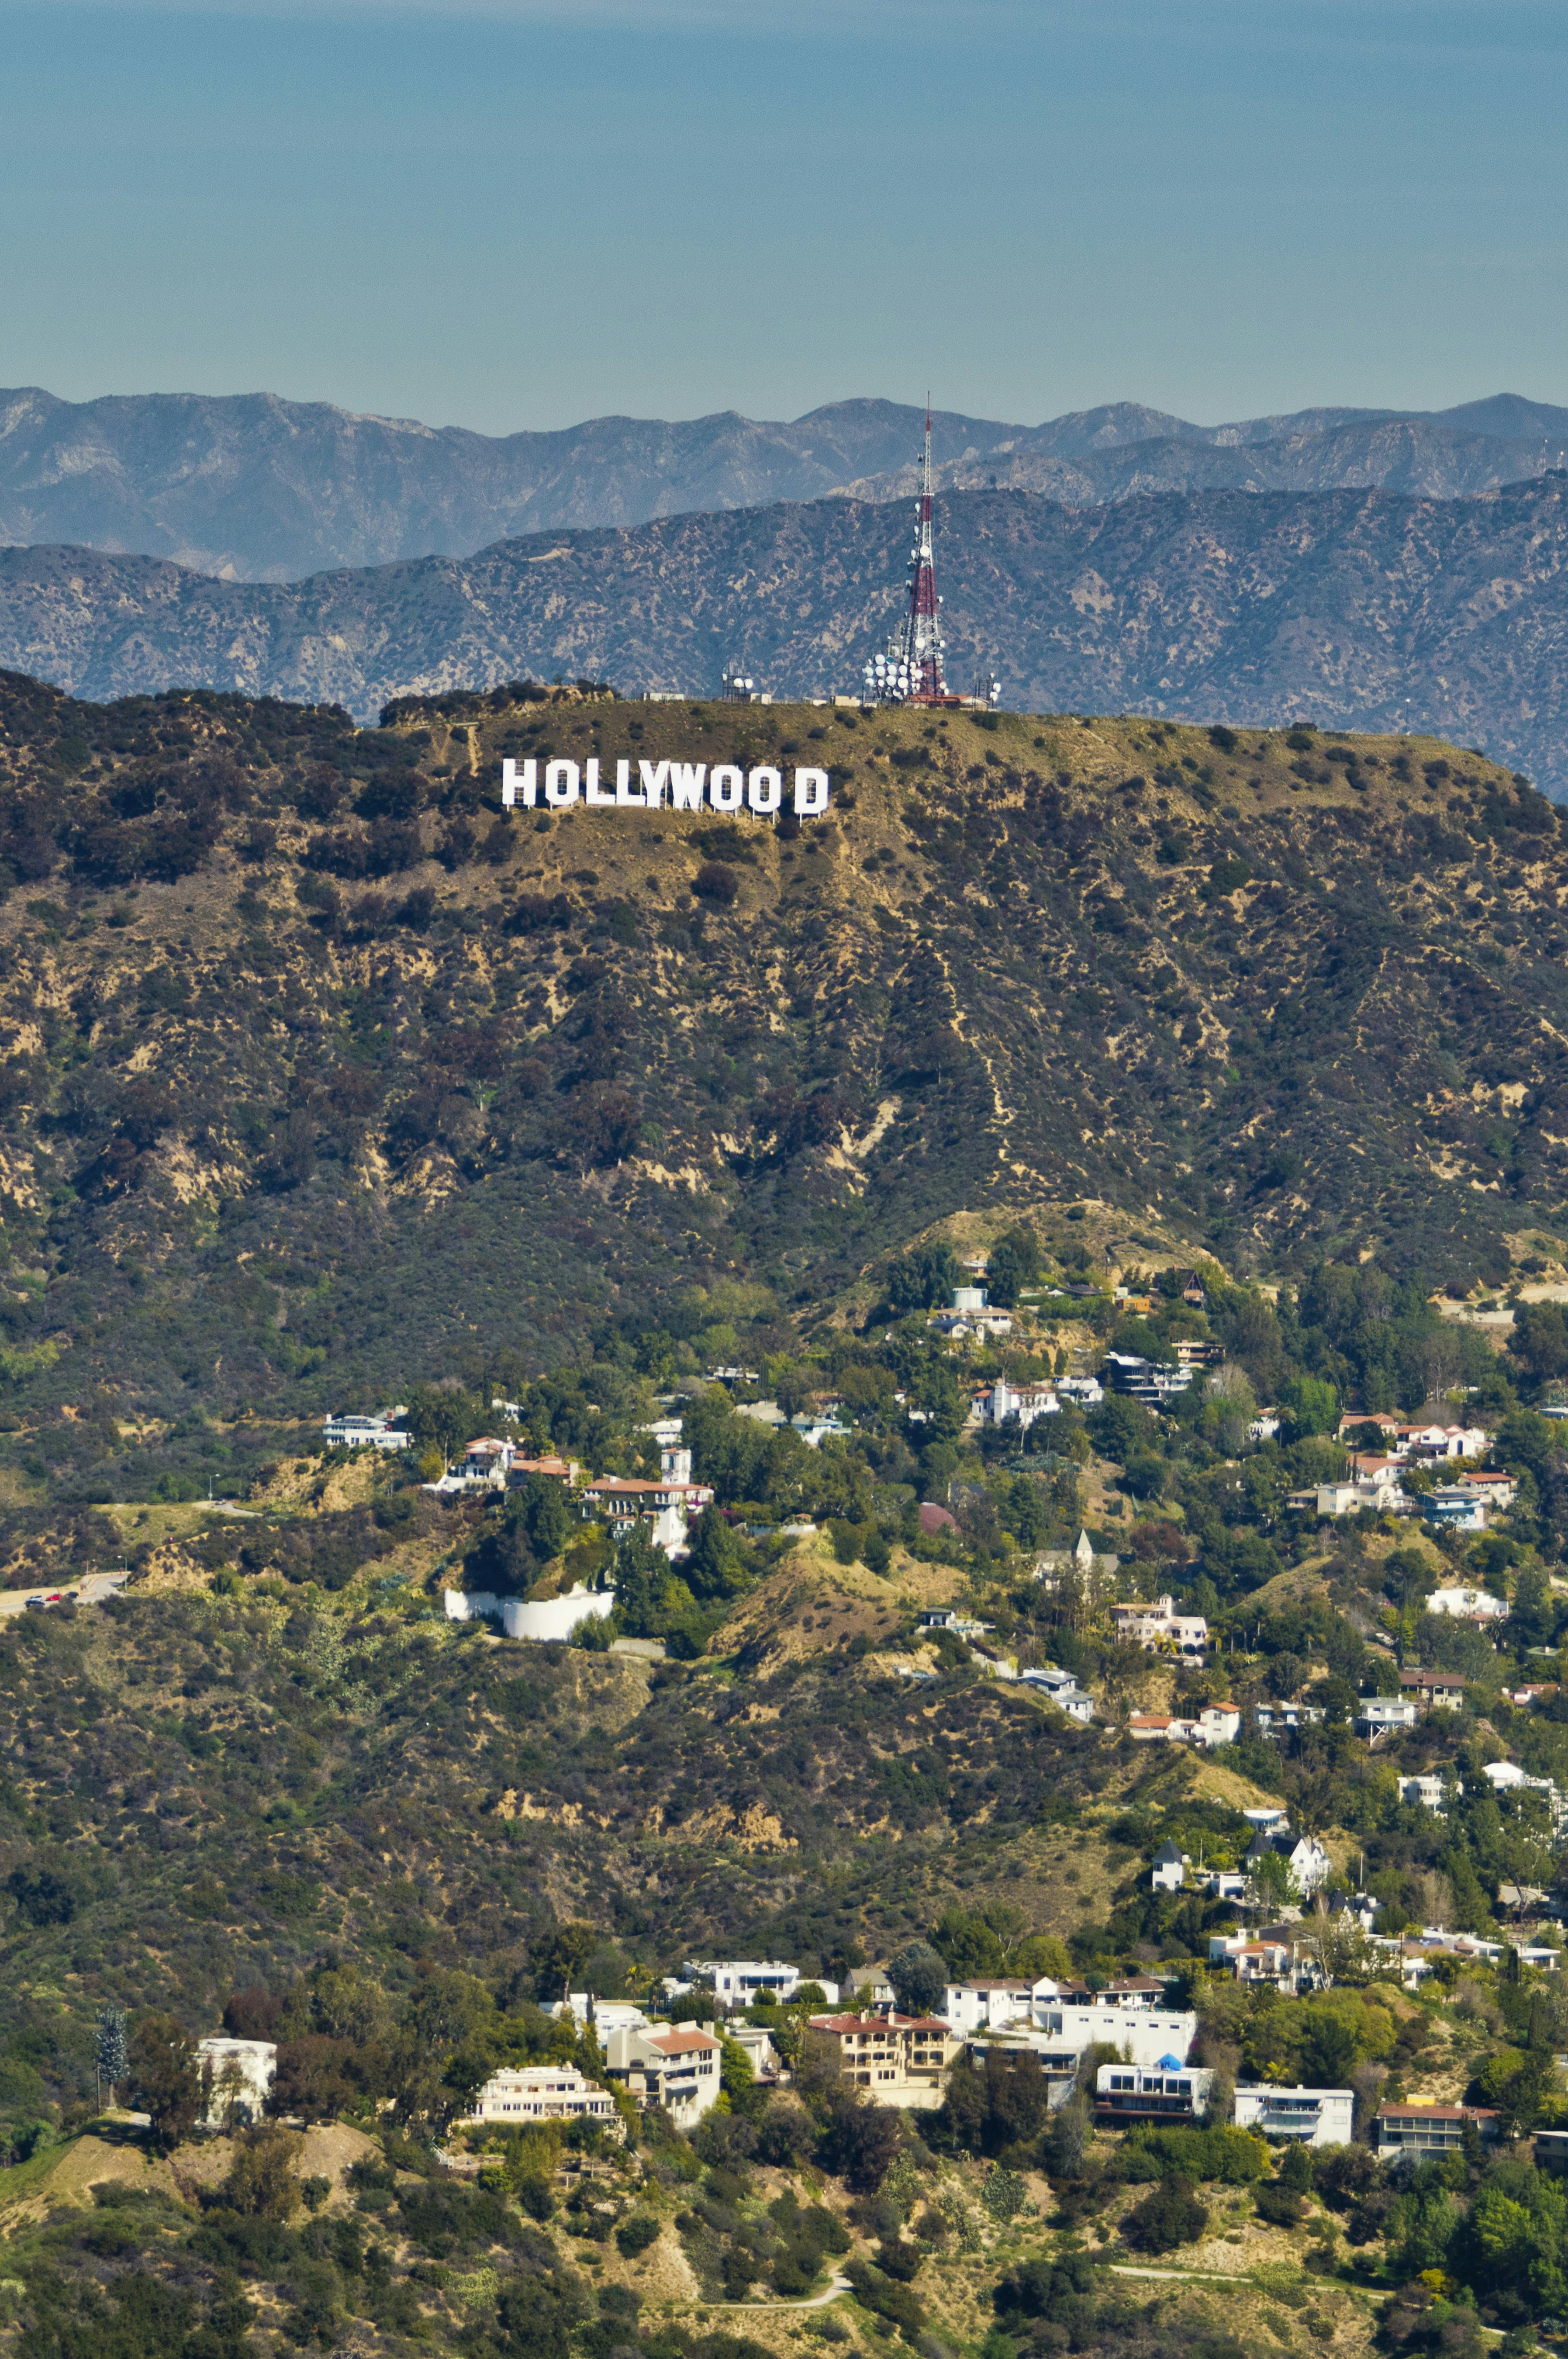 Hollywood sign in Los Angeles, California